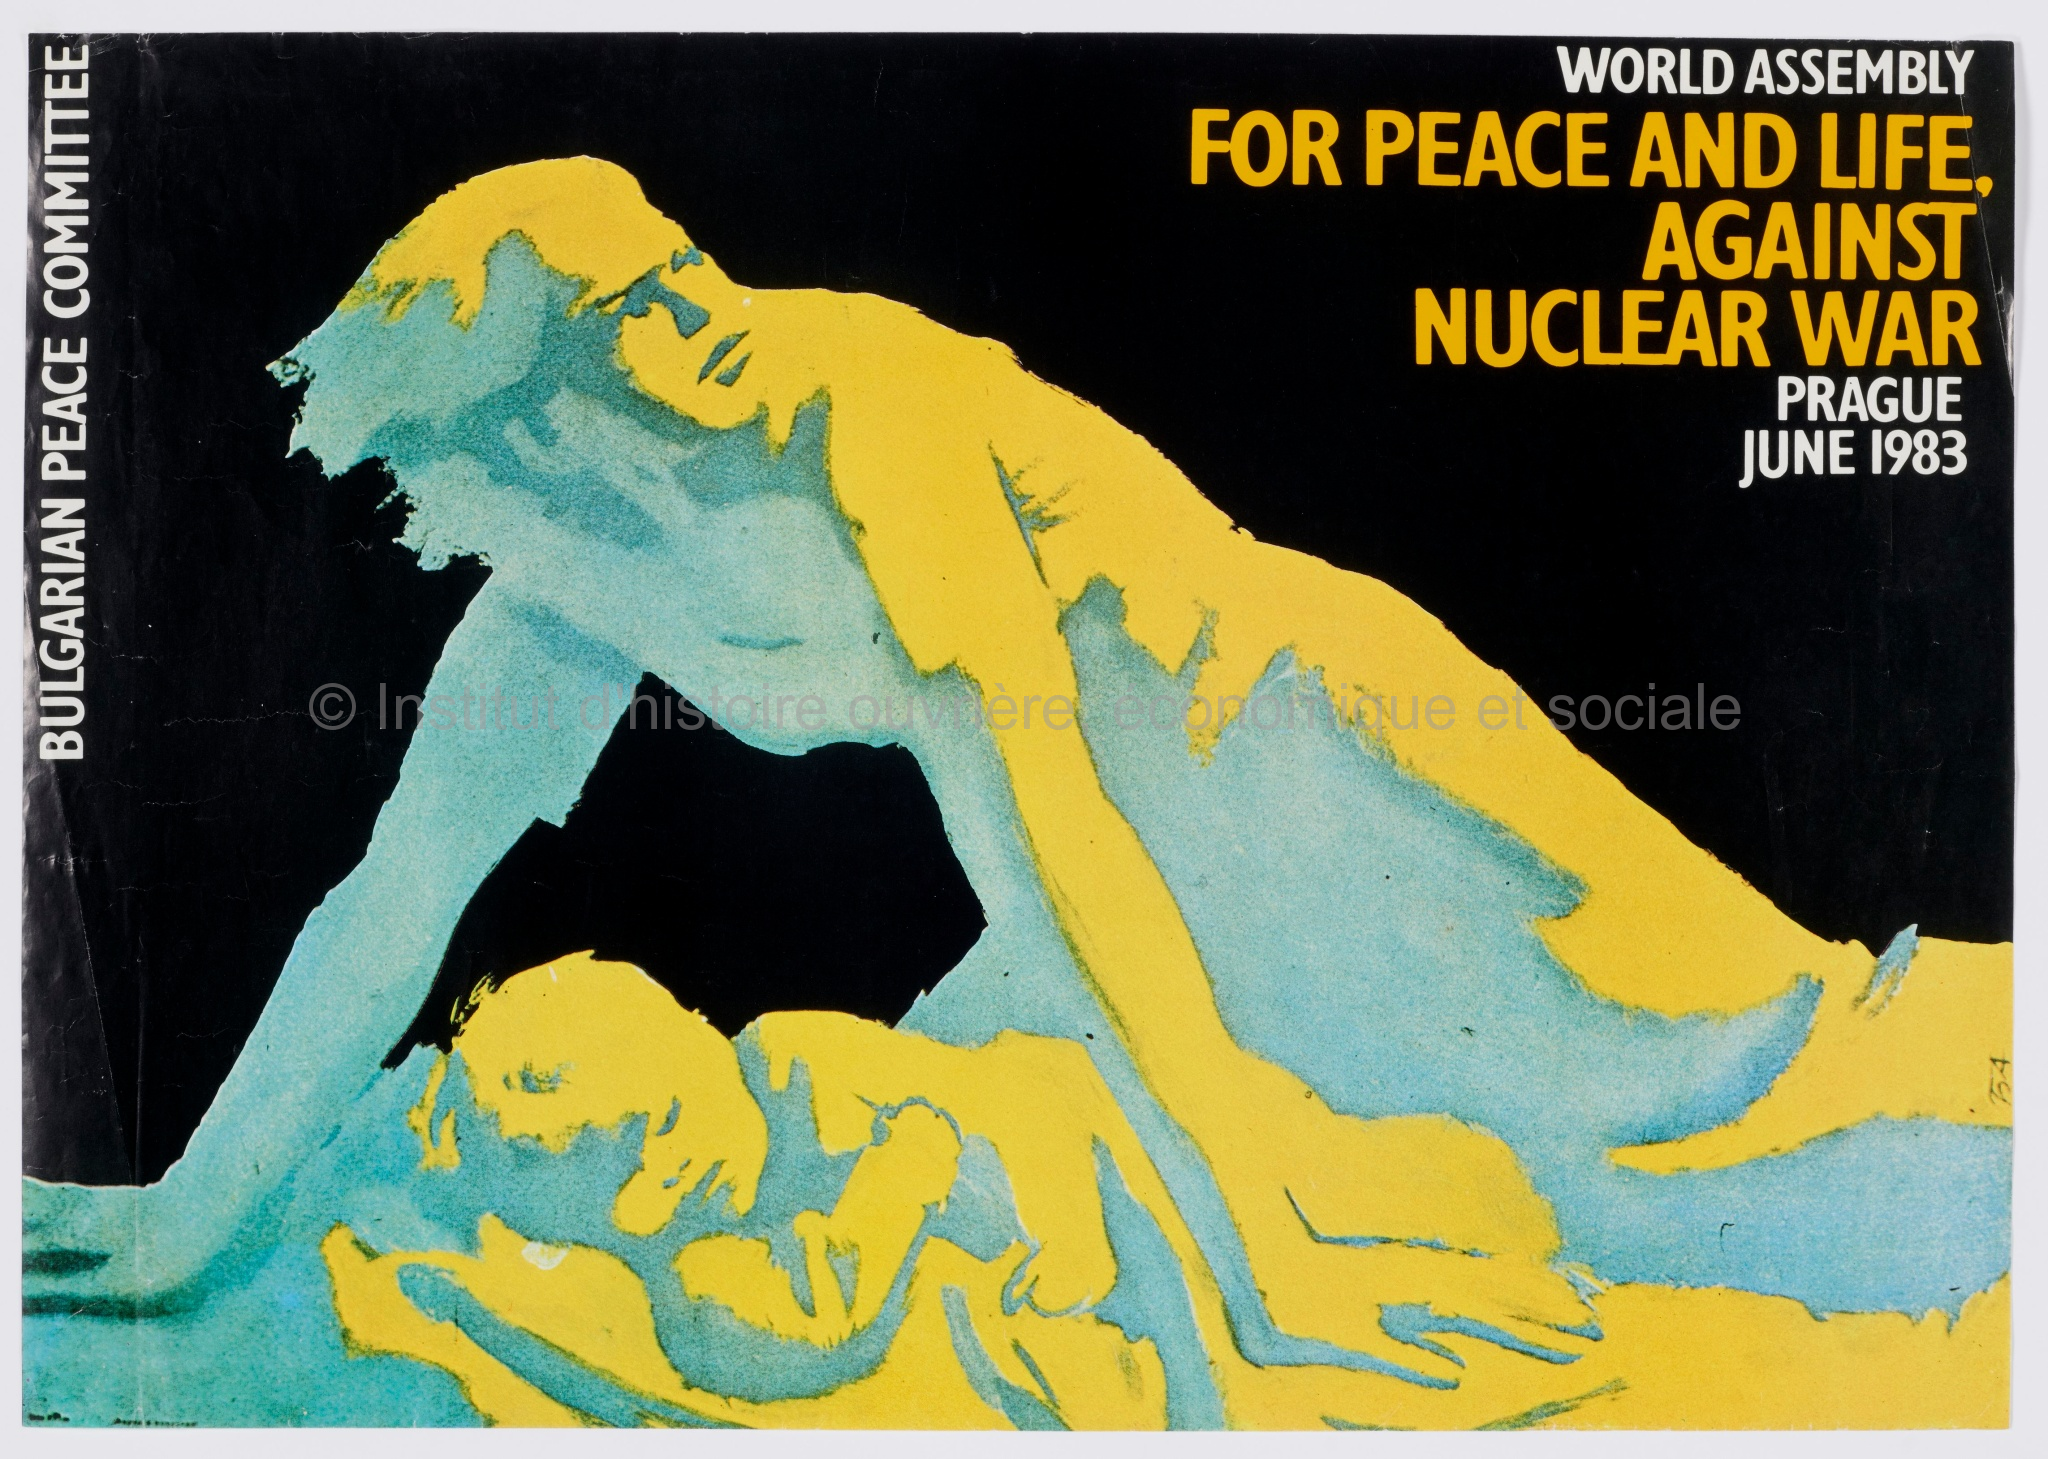 World assembly for peace and life against nuclear war : Prague, june 1983